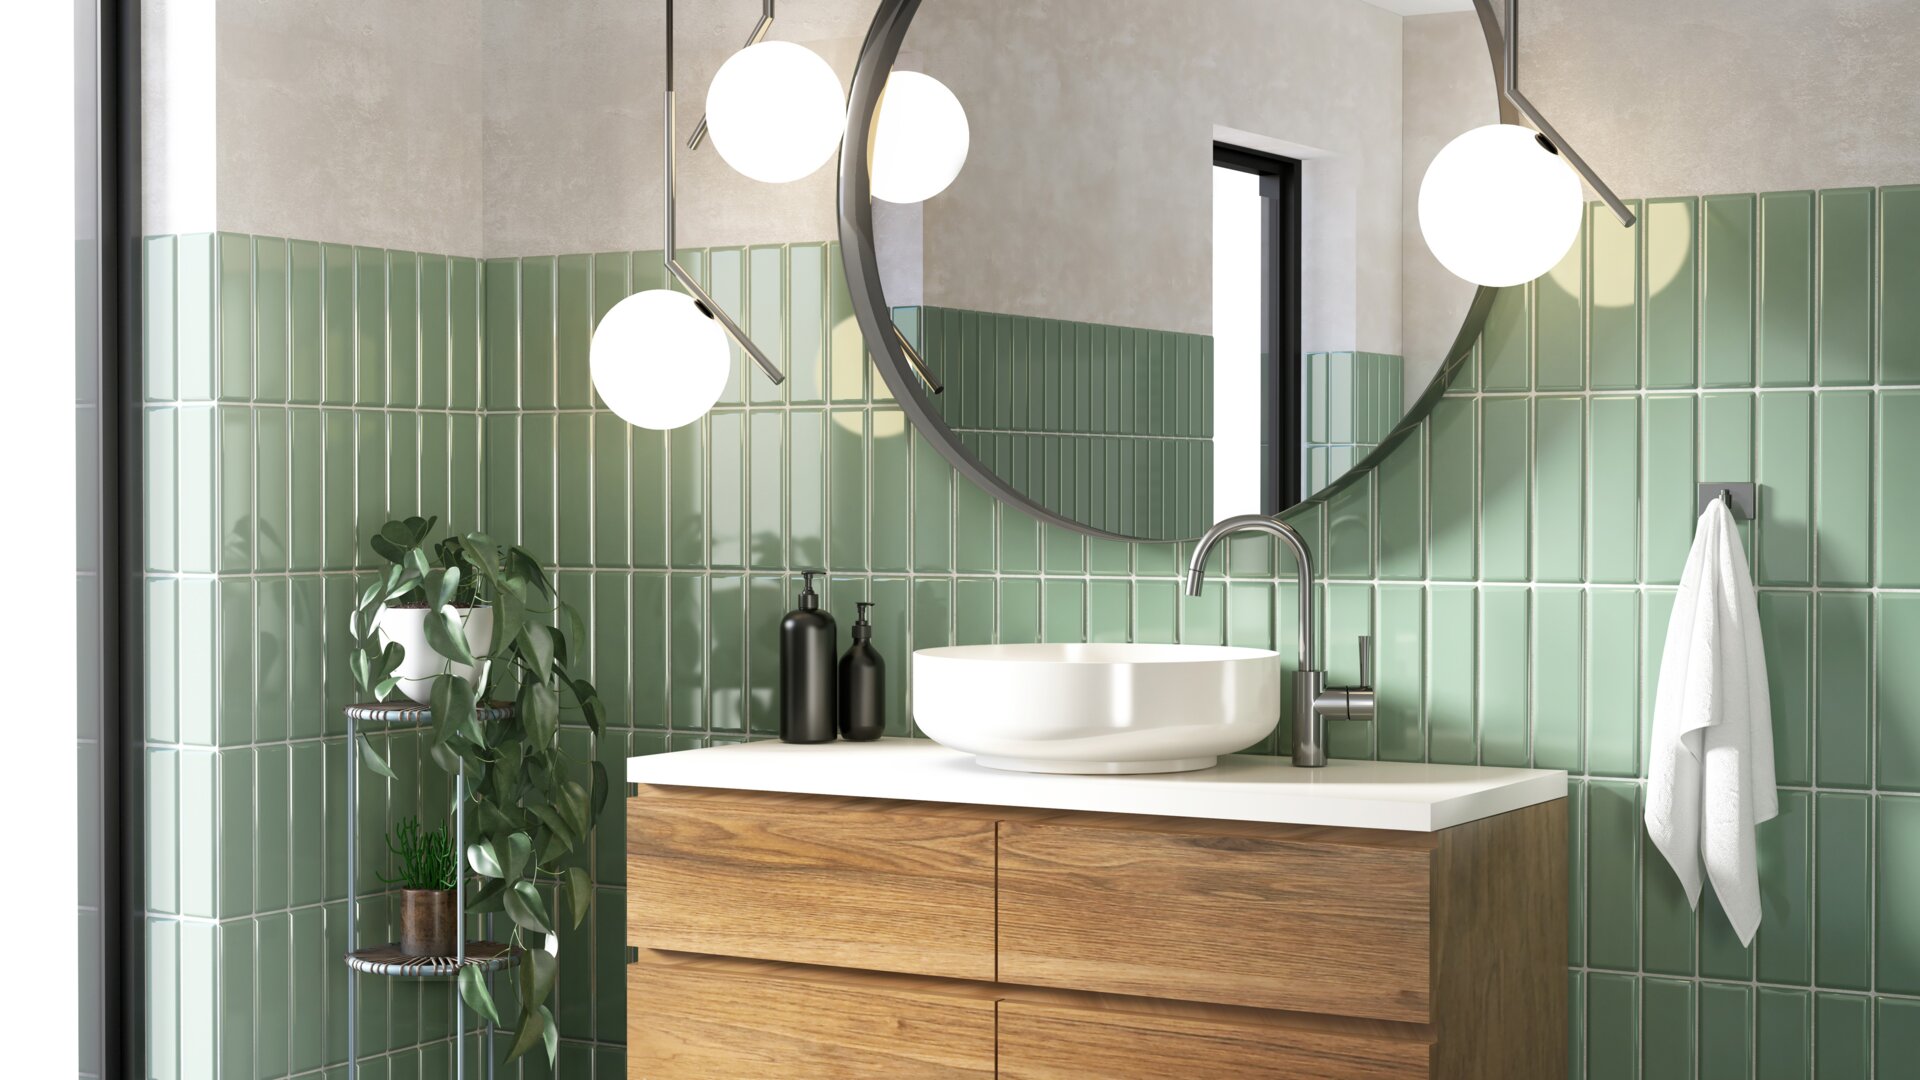 Modern bathroom with green tiles, large round mirror and bathroom cabinet with wooden front.